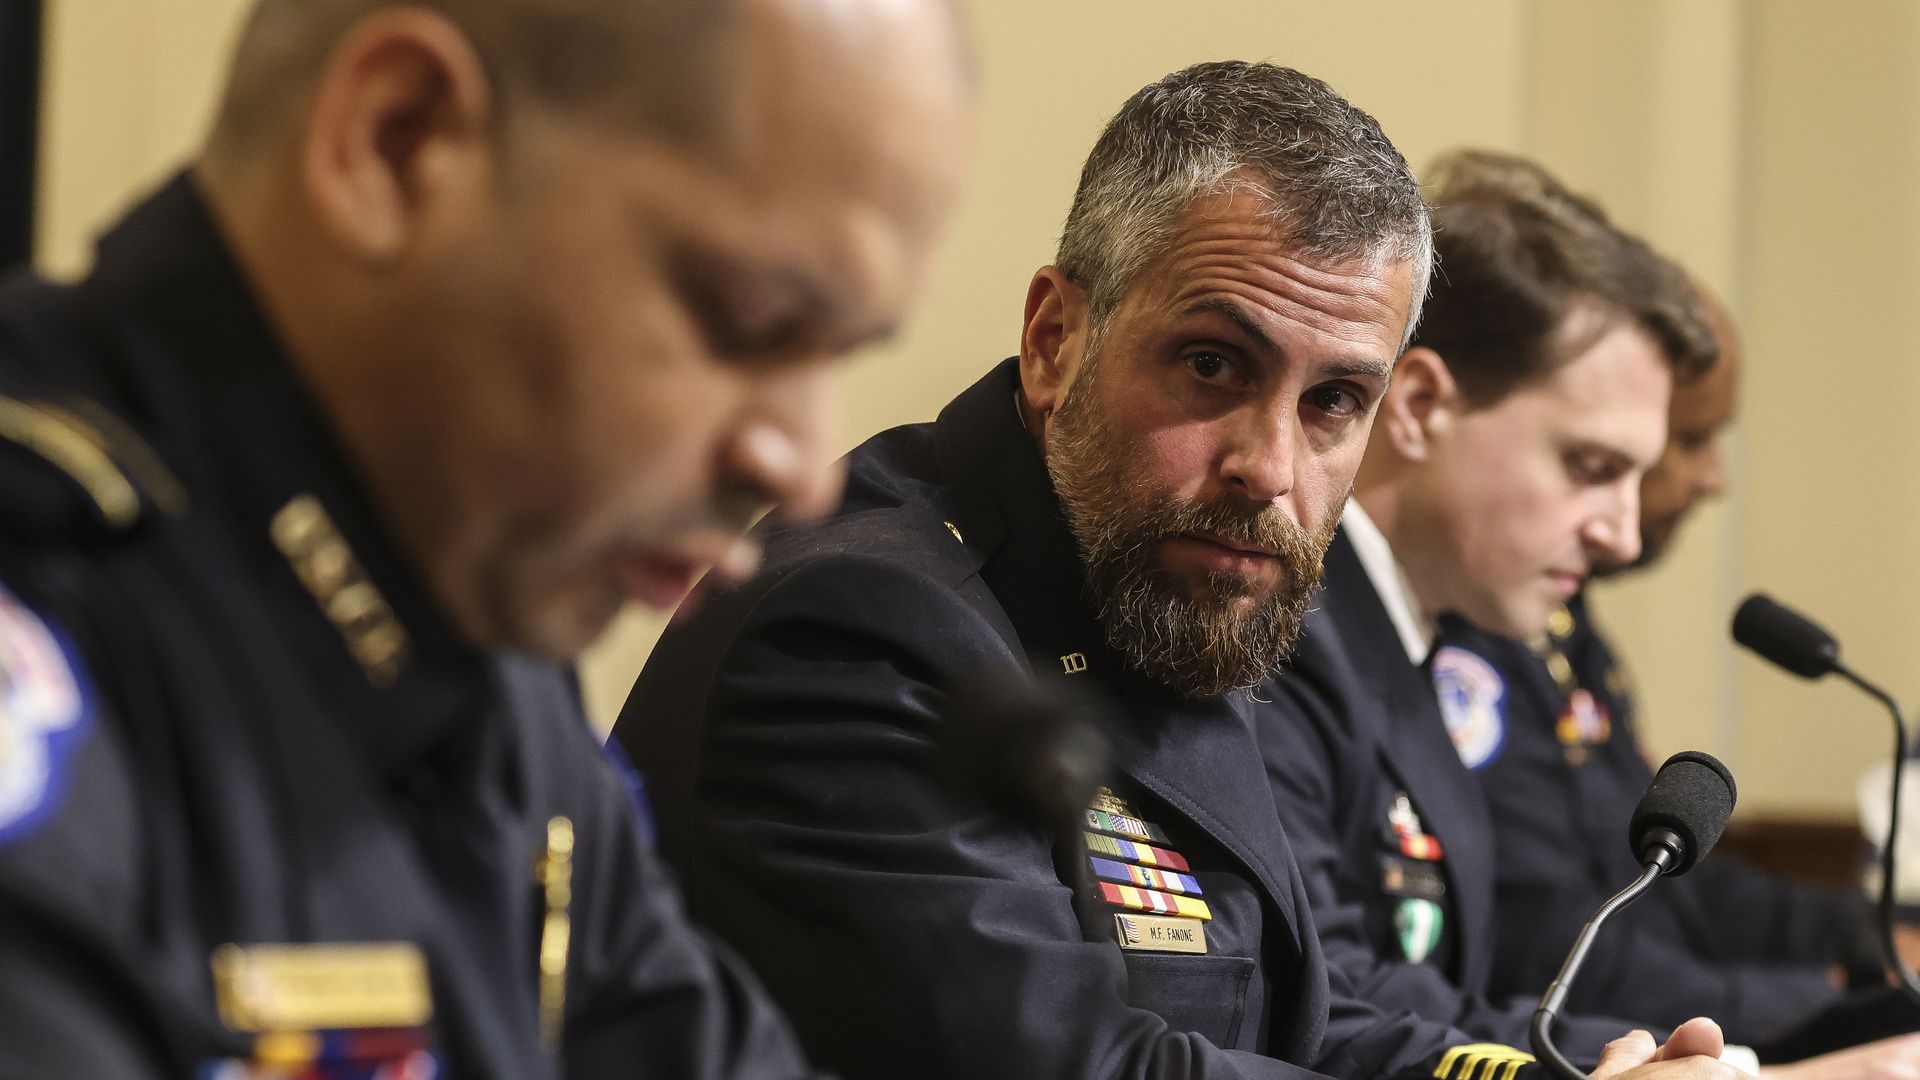  U.S. Capitol Police, Michael Fanone, right, looks on as U.S. Capitol Police officer Sgt. Aquilino Gonell, left, testifies before the House Select Committee investigating the January 6 attack